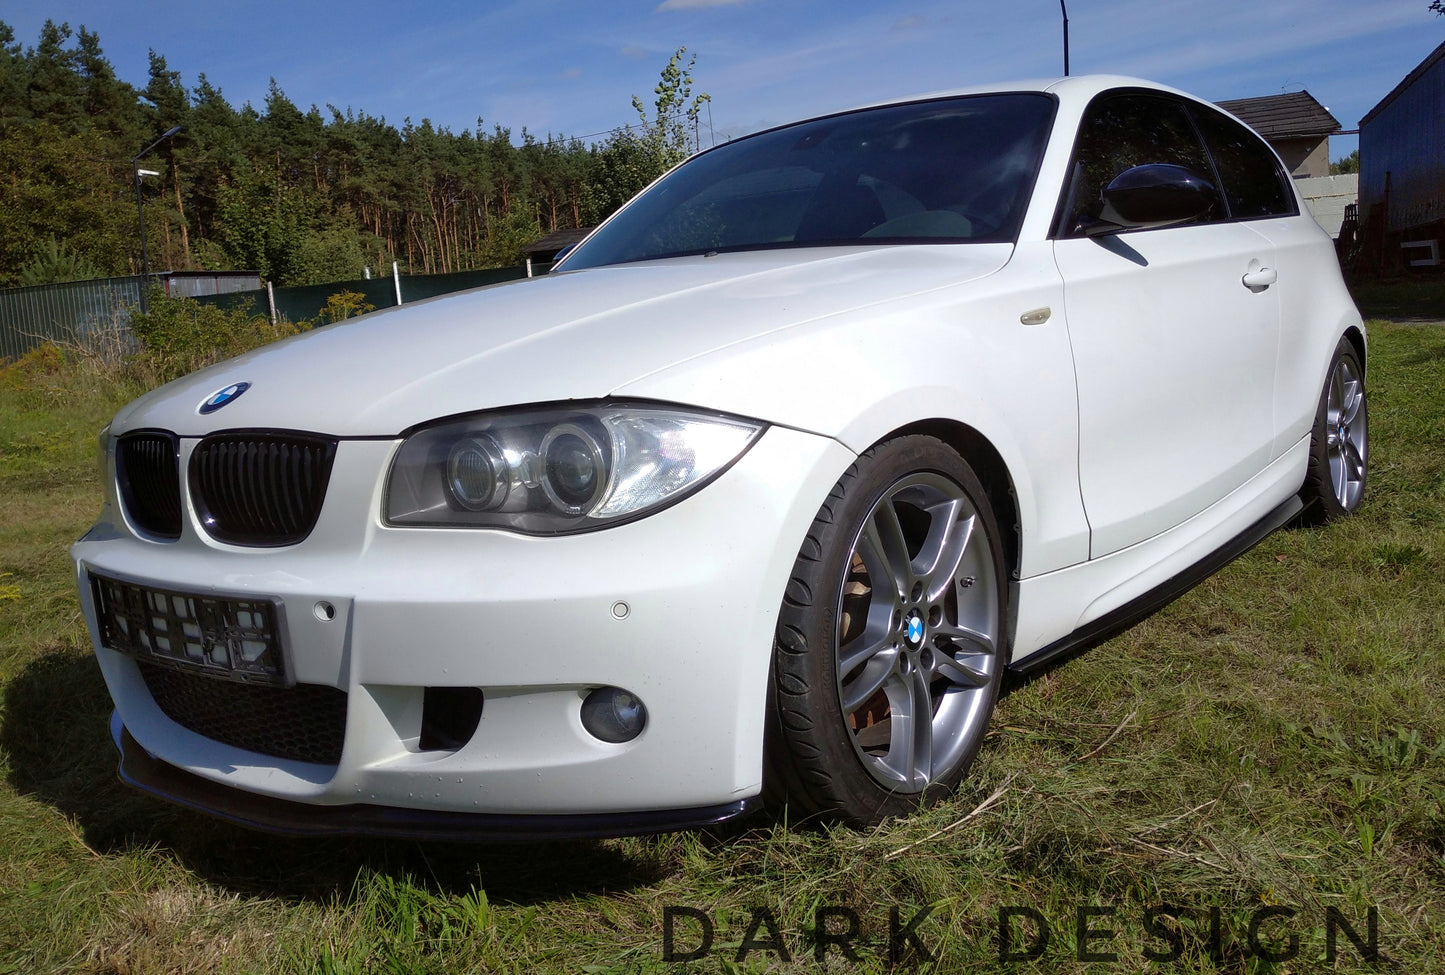 Bmw 1 E81 E87 Dark Design Style set (full) body kit individual style for M pack package